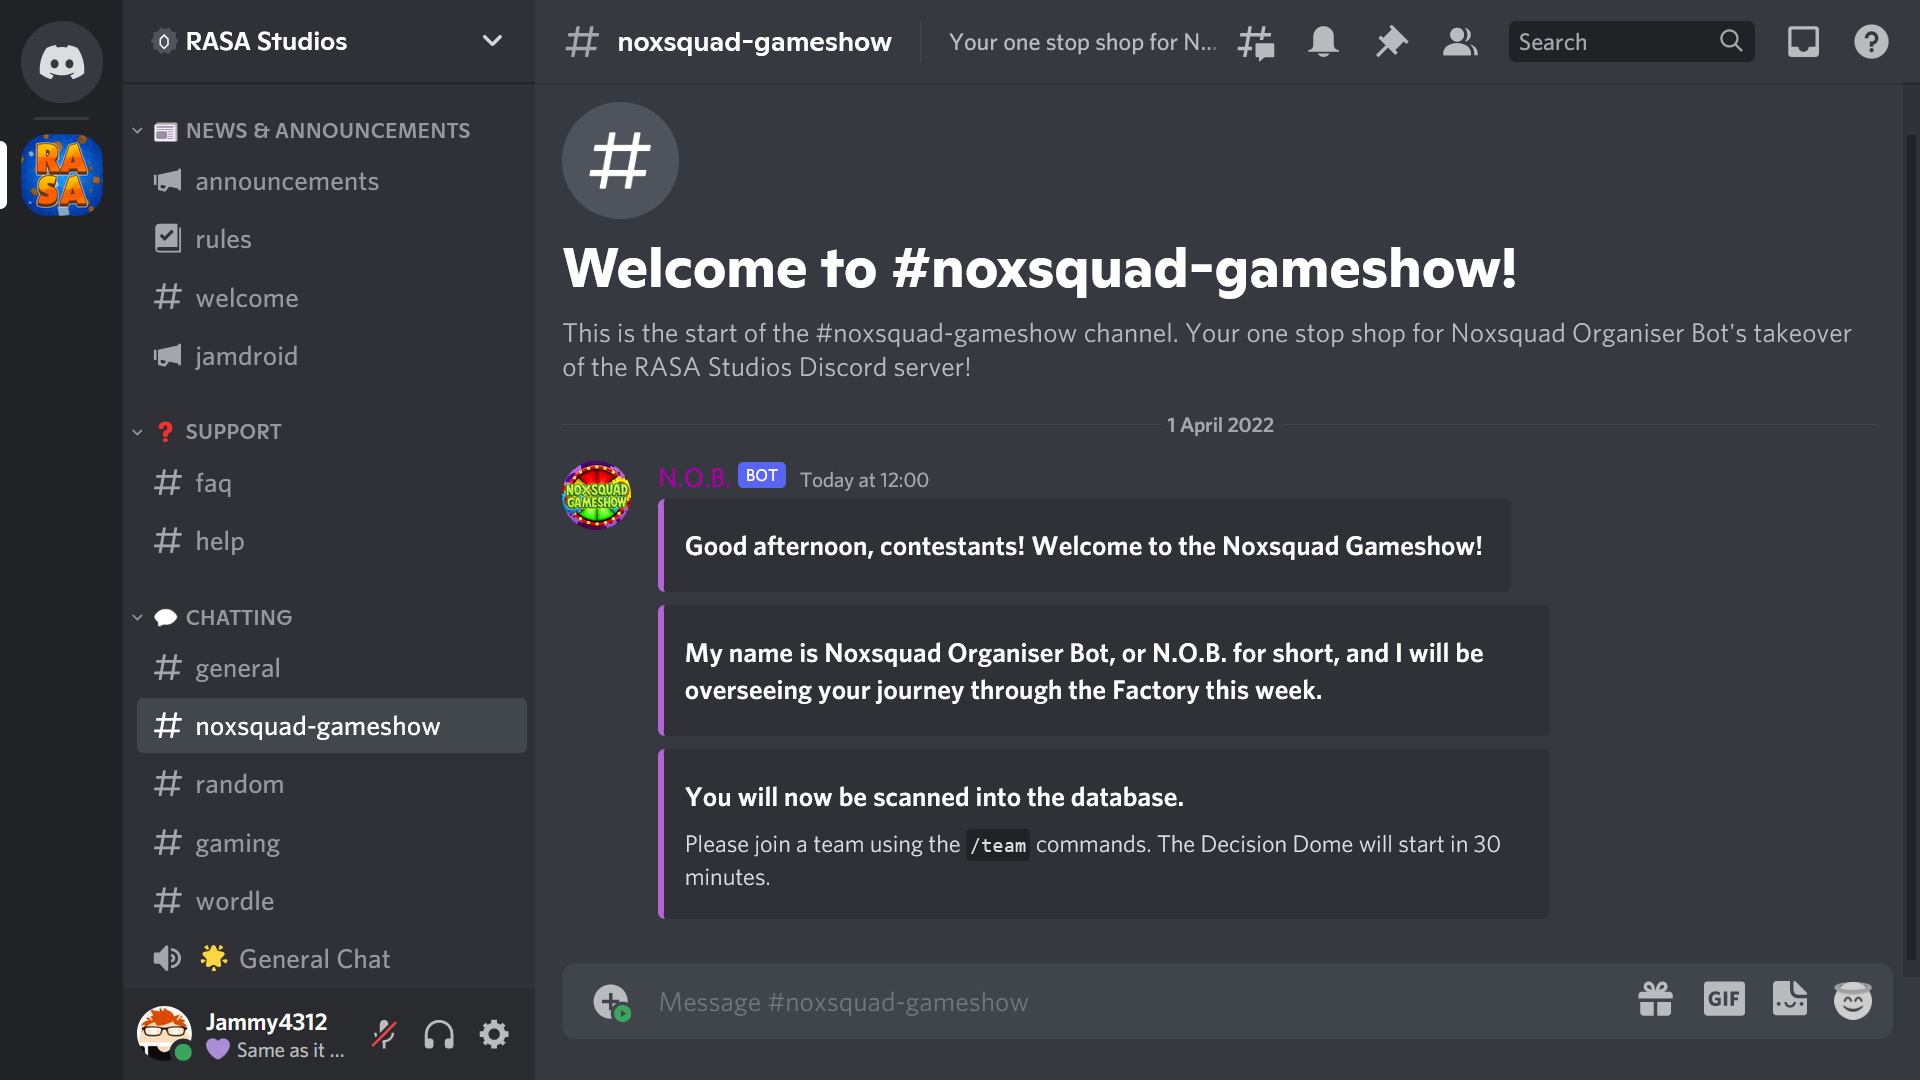 A screenshot of the RASA Studios Discord server. The bot user "N.O.B." has sent a series of messages starting at noon on the 1st of April 2022. The messages read "Good afternoon, contestants! Welcome to the Noxsquad Gameshow! My name is Noxsquad Organiser Bot, or N.O.B. for short, and I will be overseeing your journey through the Factory this week. You will now be scanned into the database. Please join a team using the /team commands. The Decision Dome will start in 30 minutes."